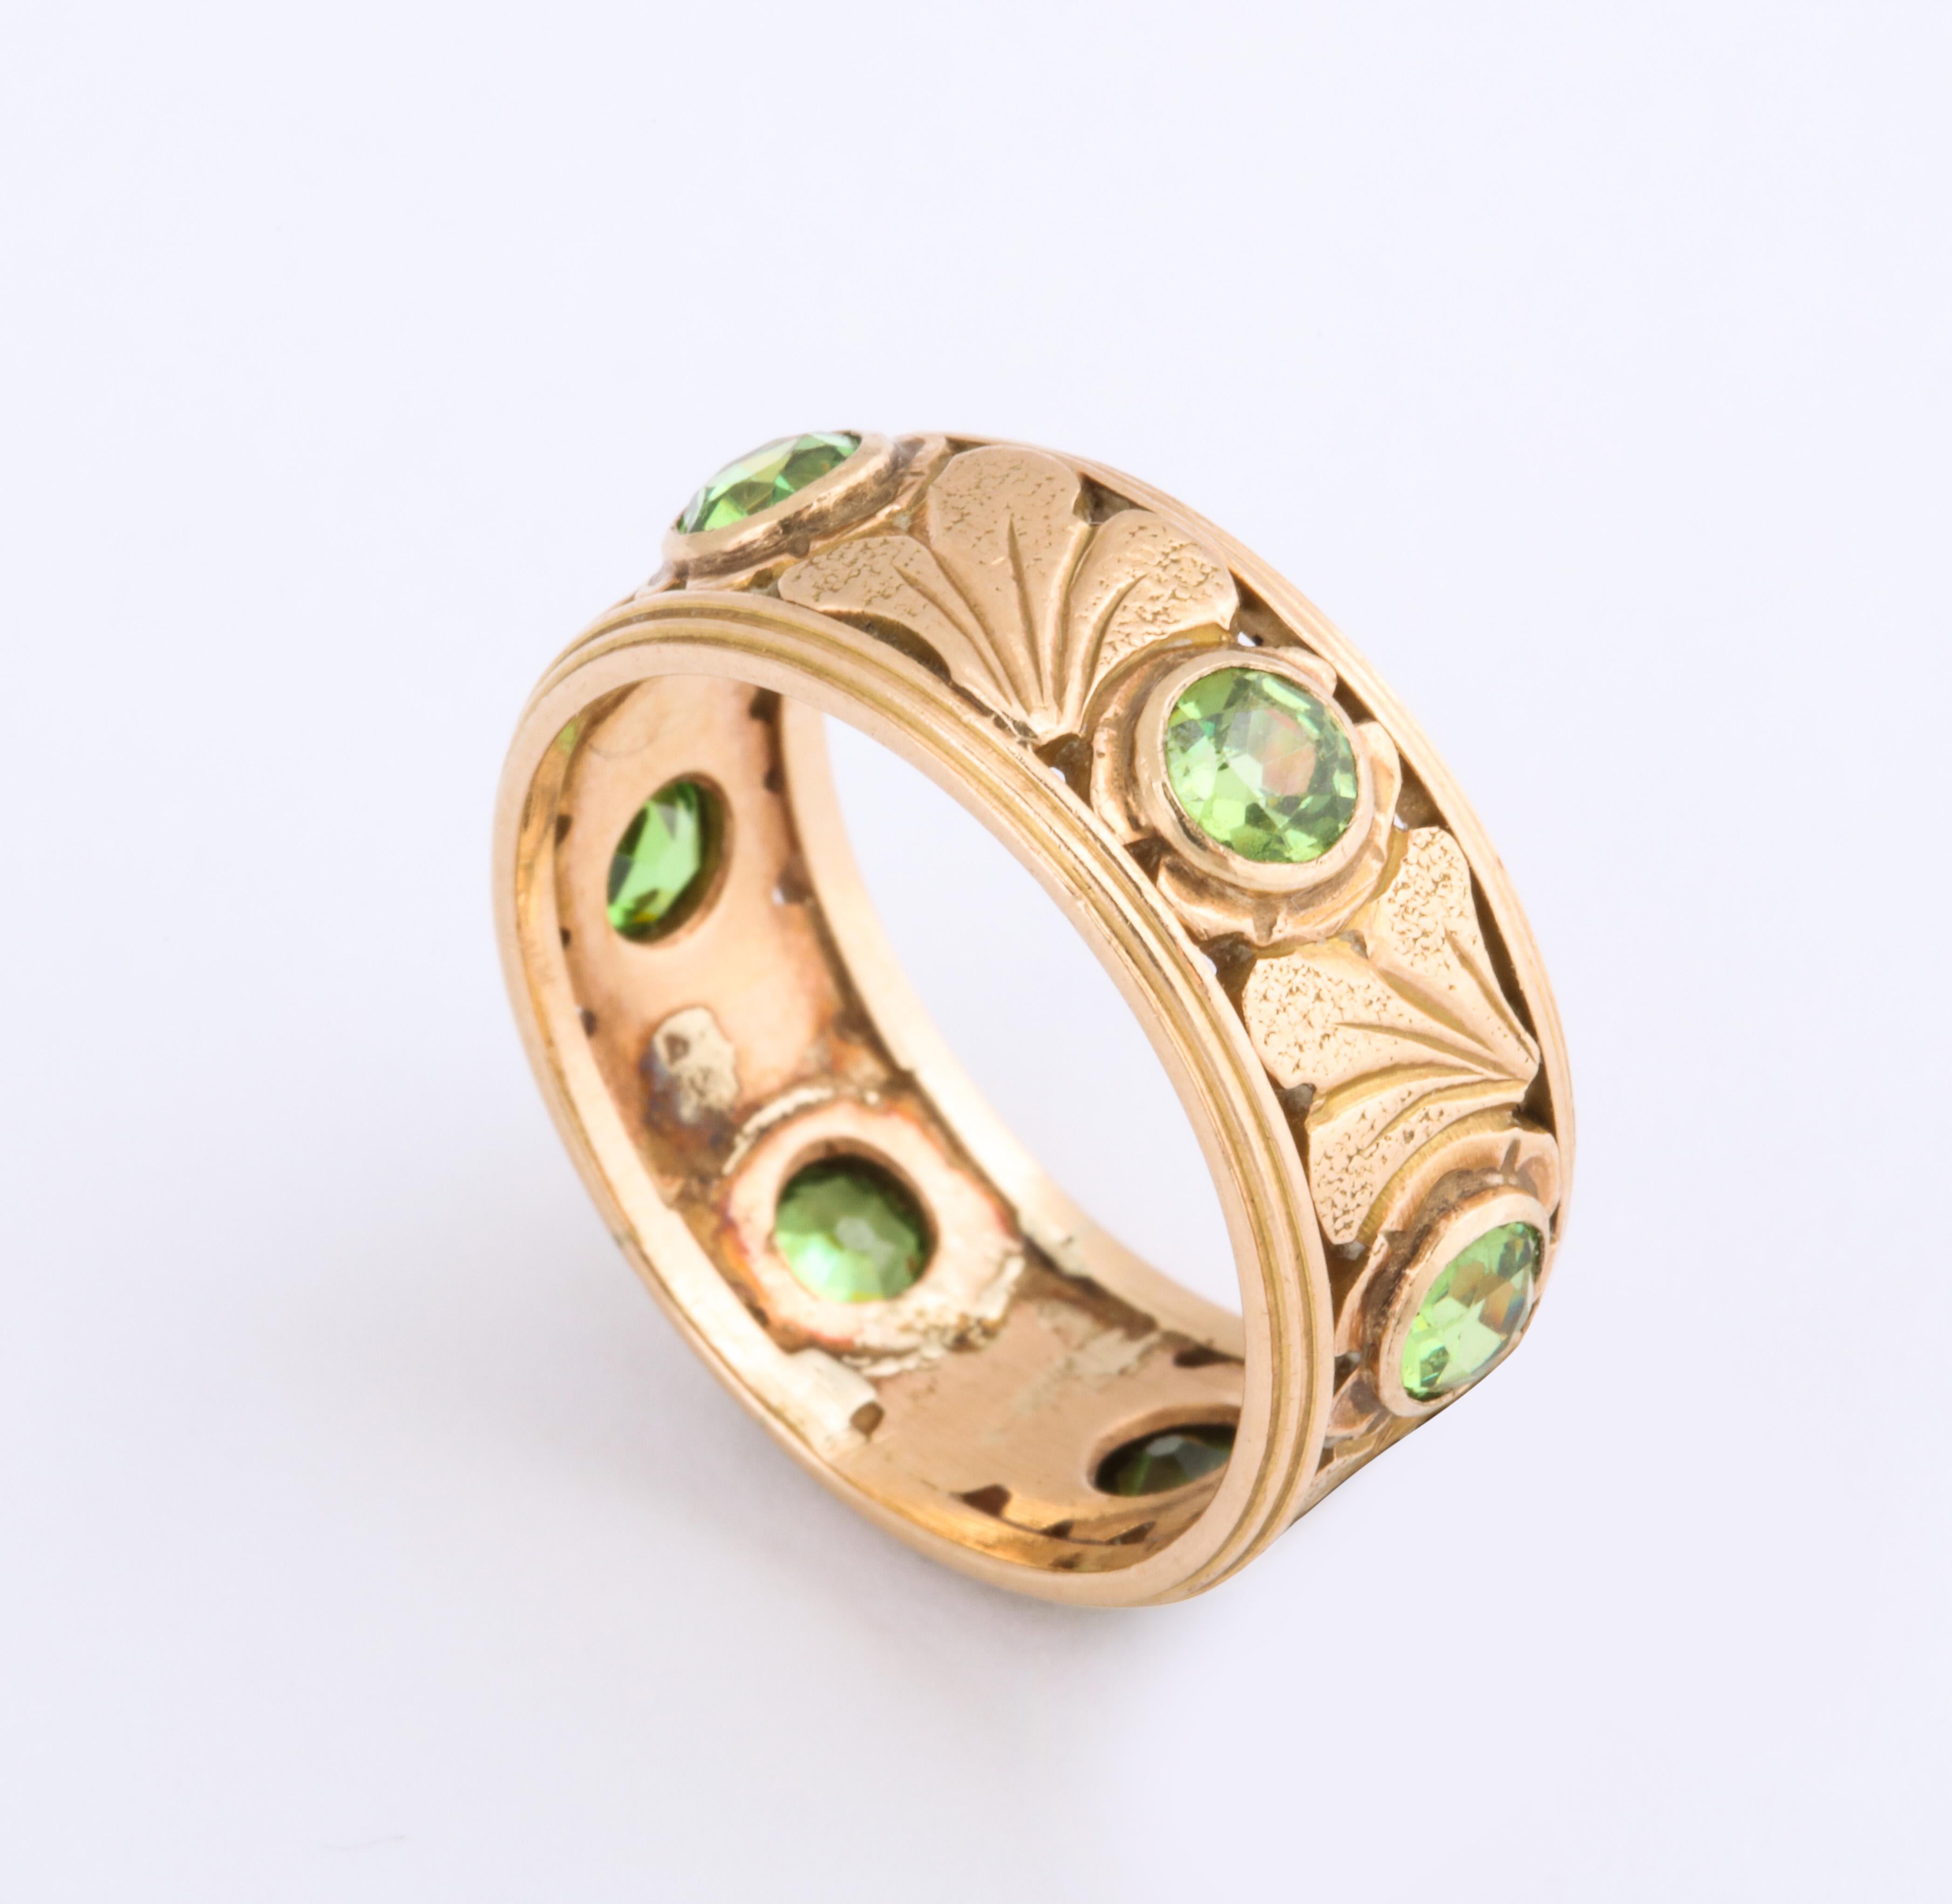 Round Cut Antique Art Nouveau Gold and Demantoid Ring with Ginko Leaves